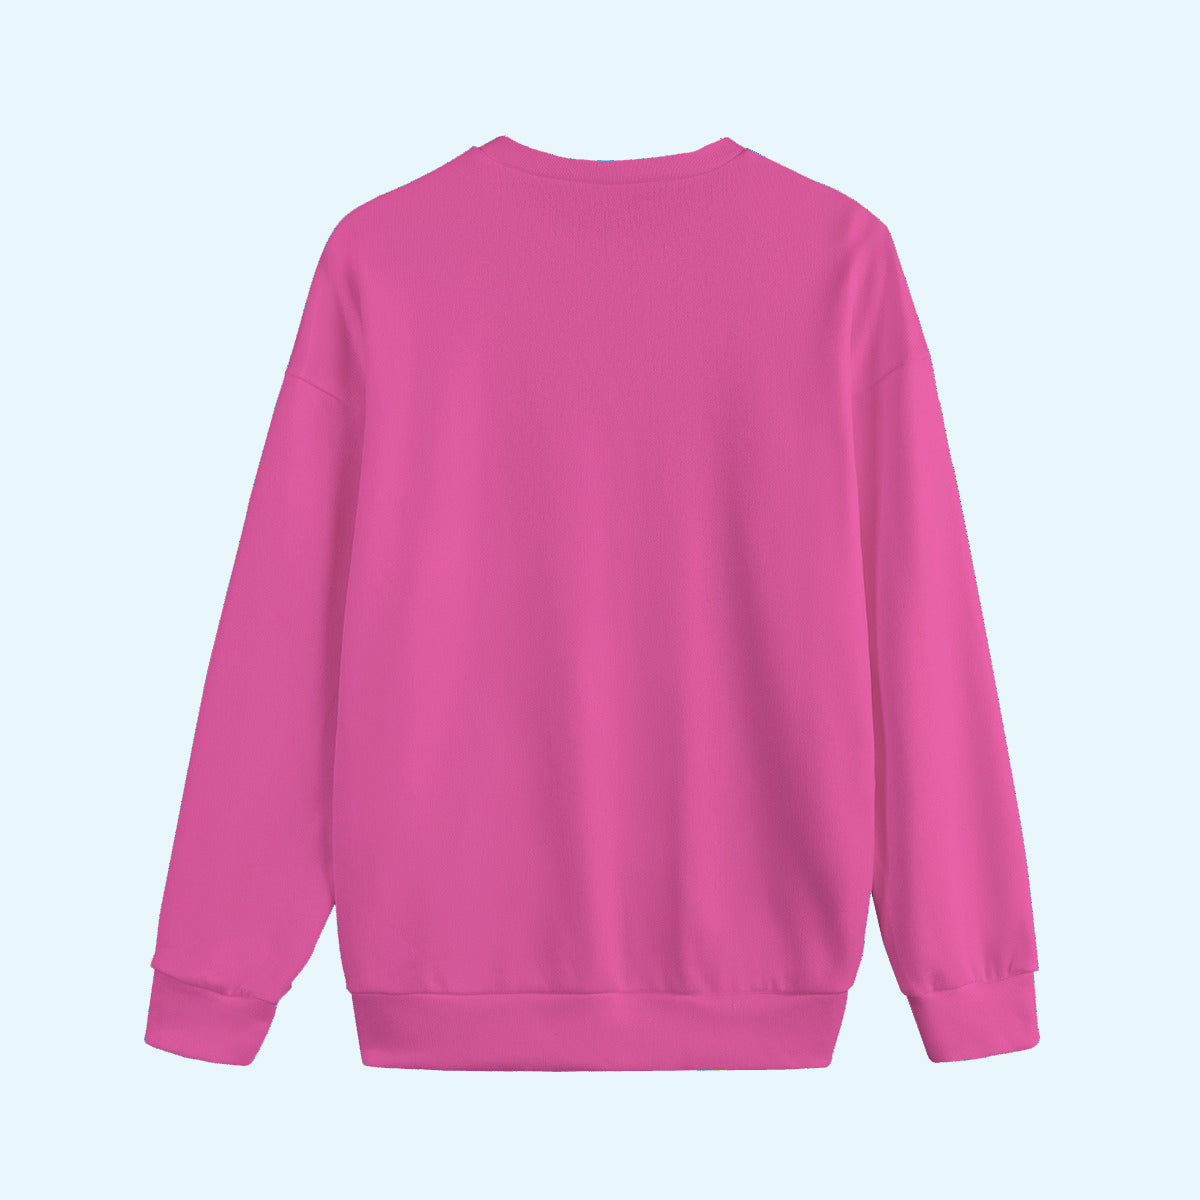 Daddy's Boy Pink Unisex Knitted Fleece Sweater-S to 6XL